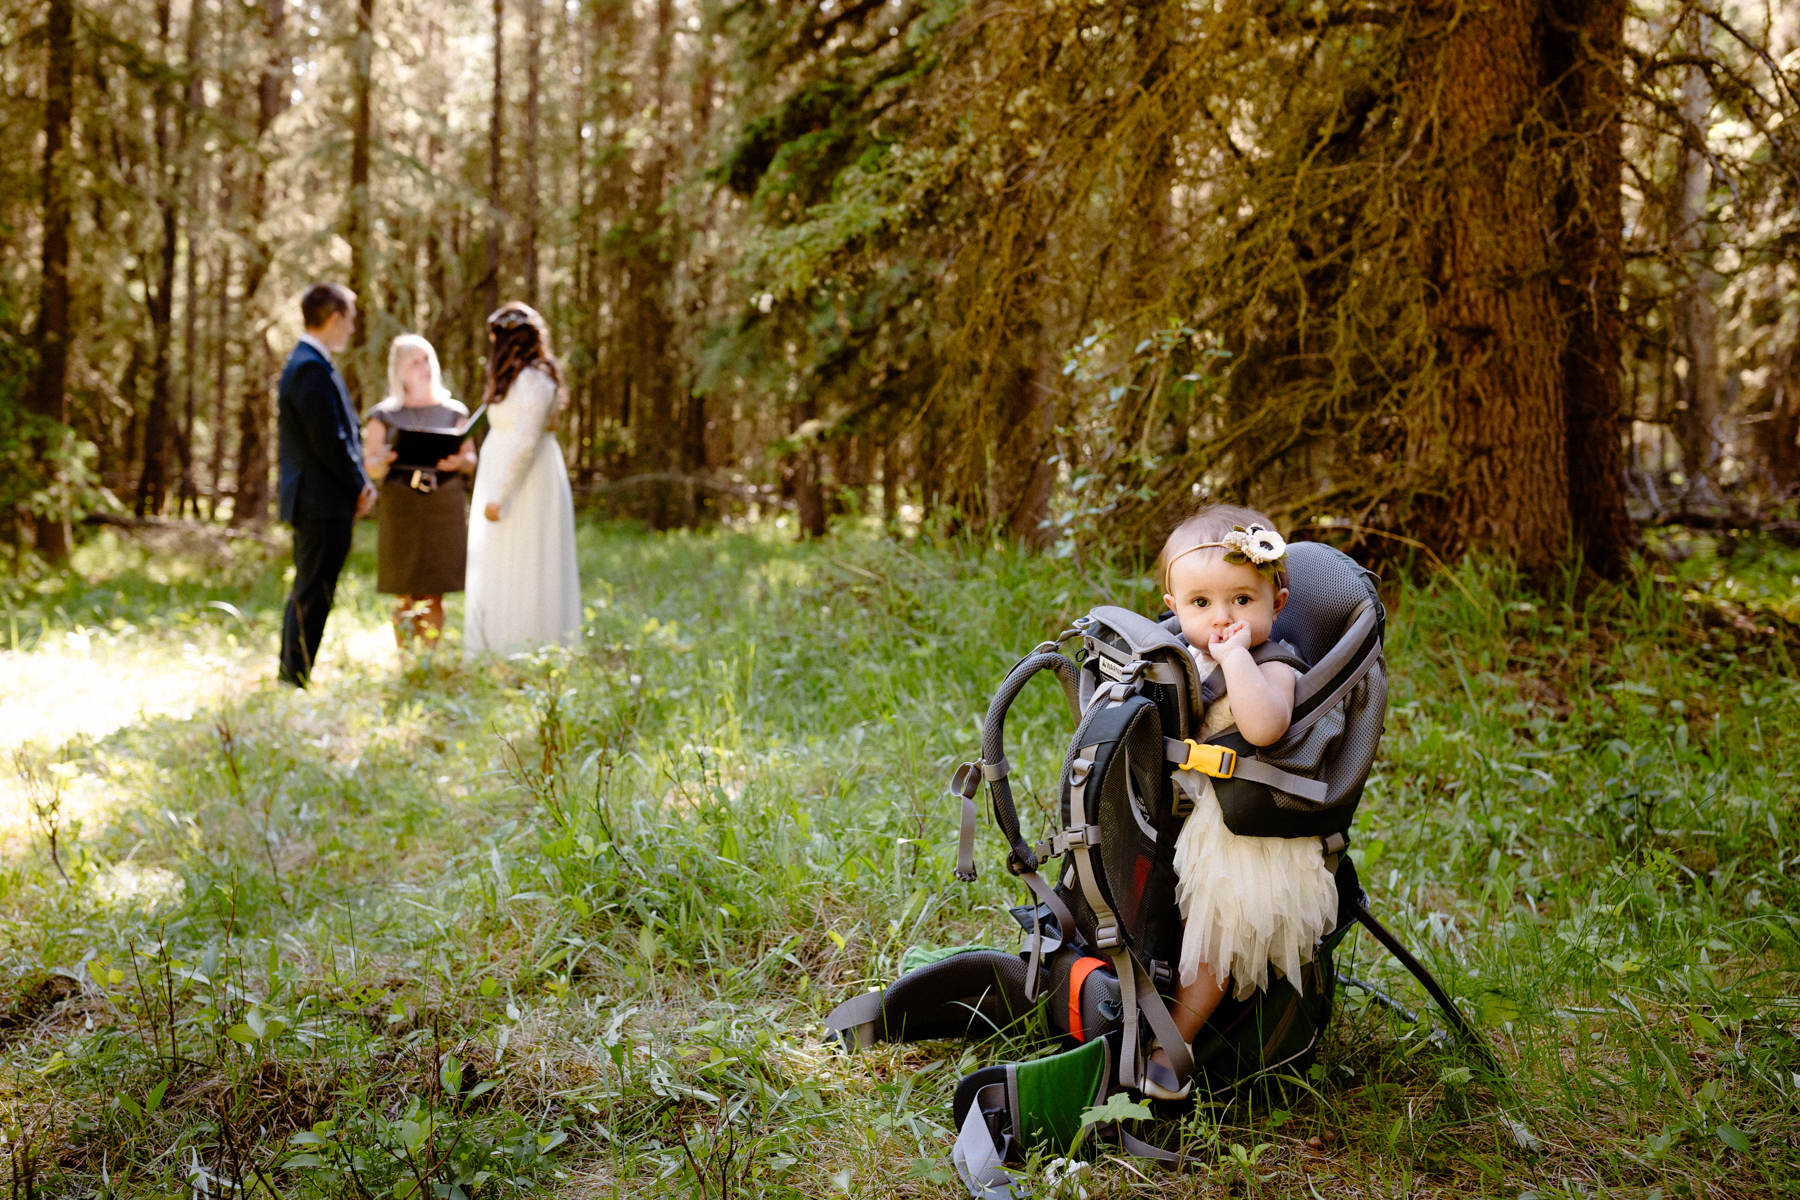 Vow Renewal Photography in Banff - Image 3